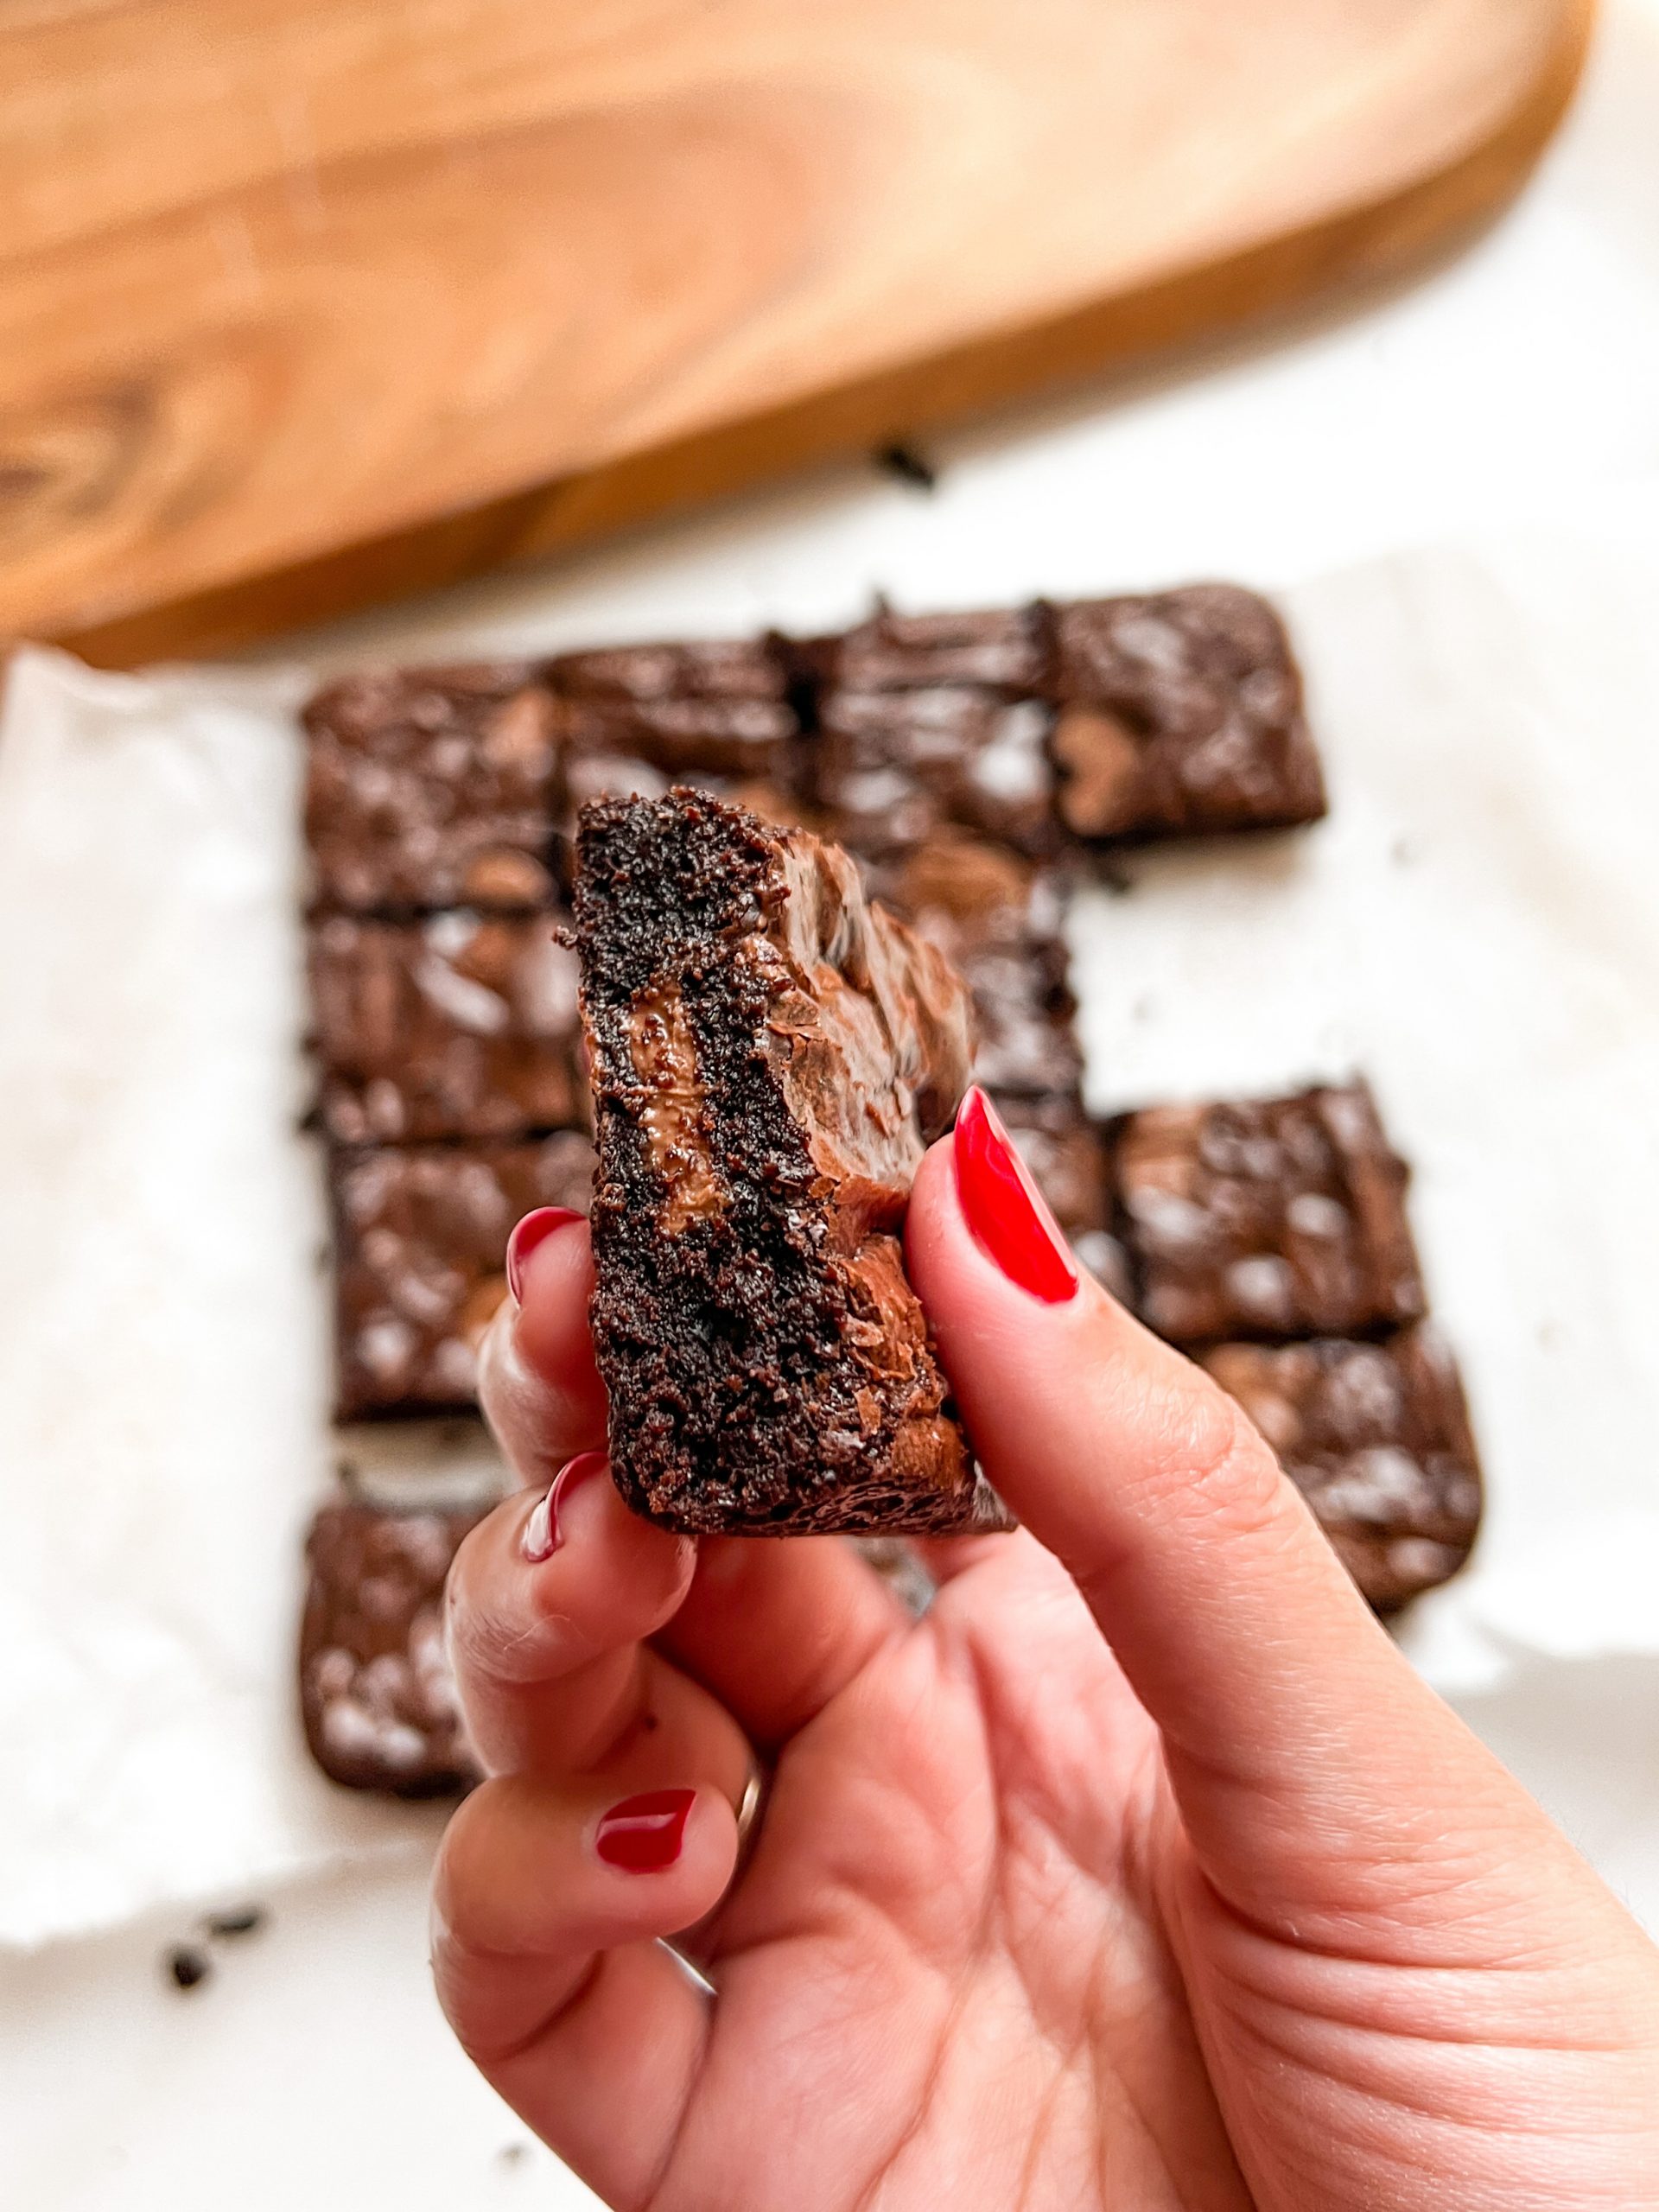 Hand holding a brownie sideways to show dark, fudgy interior with melting chocolate, with remaining brownies in the background